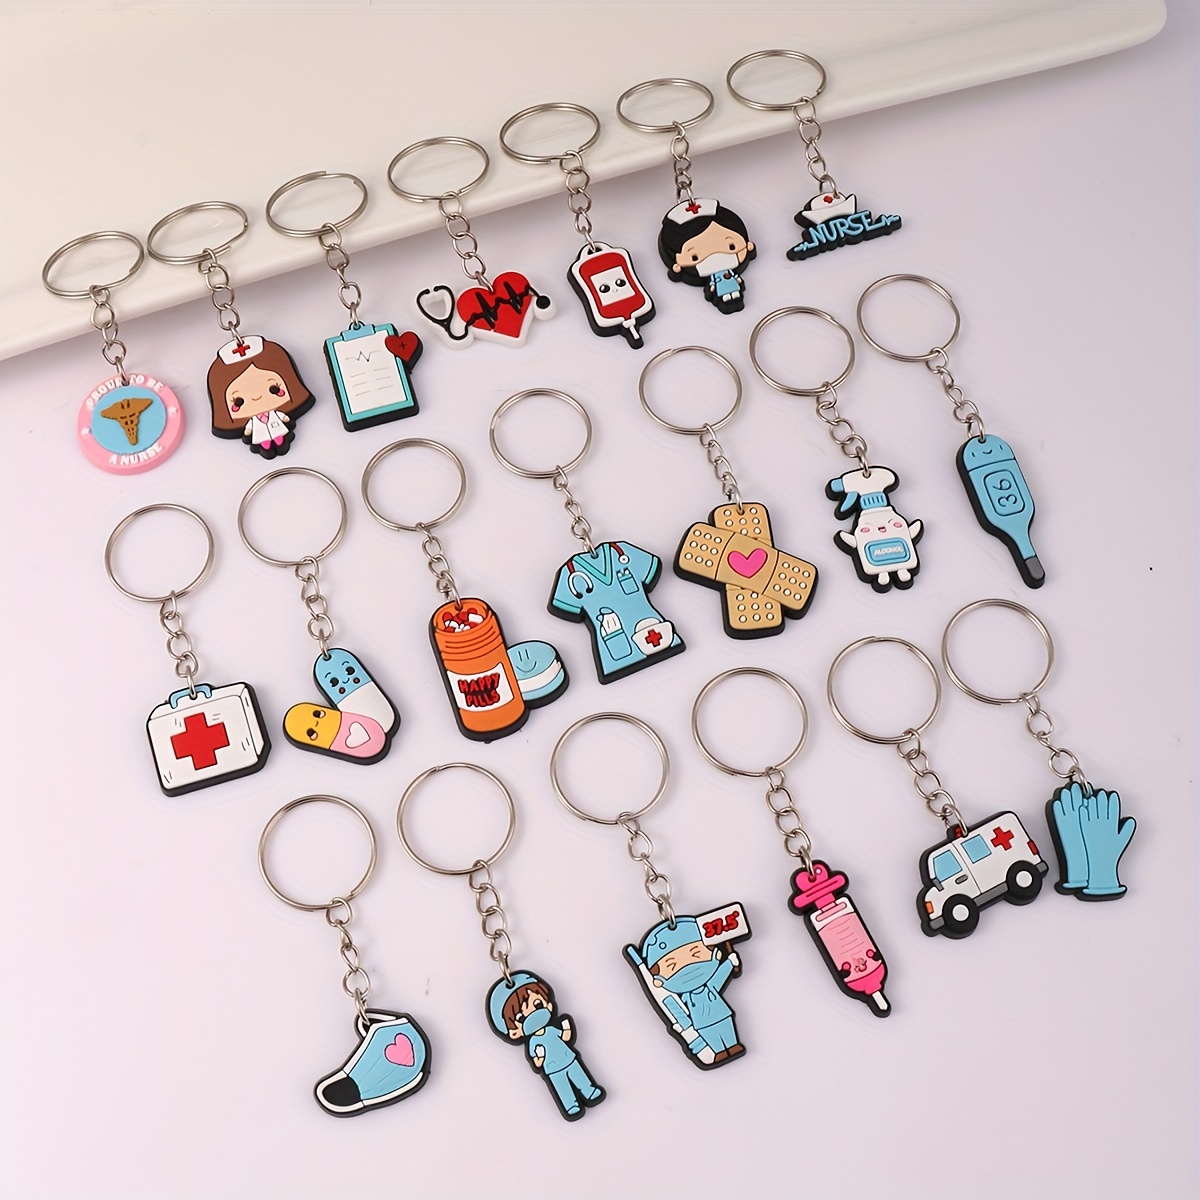 

cute Cartoons" Nurse Appreciation Keychain Set - Medical Themed Charms With Stethoscope, Syringe & More